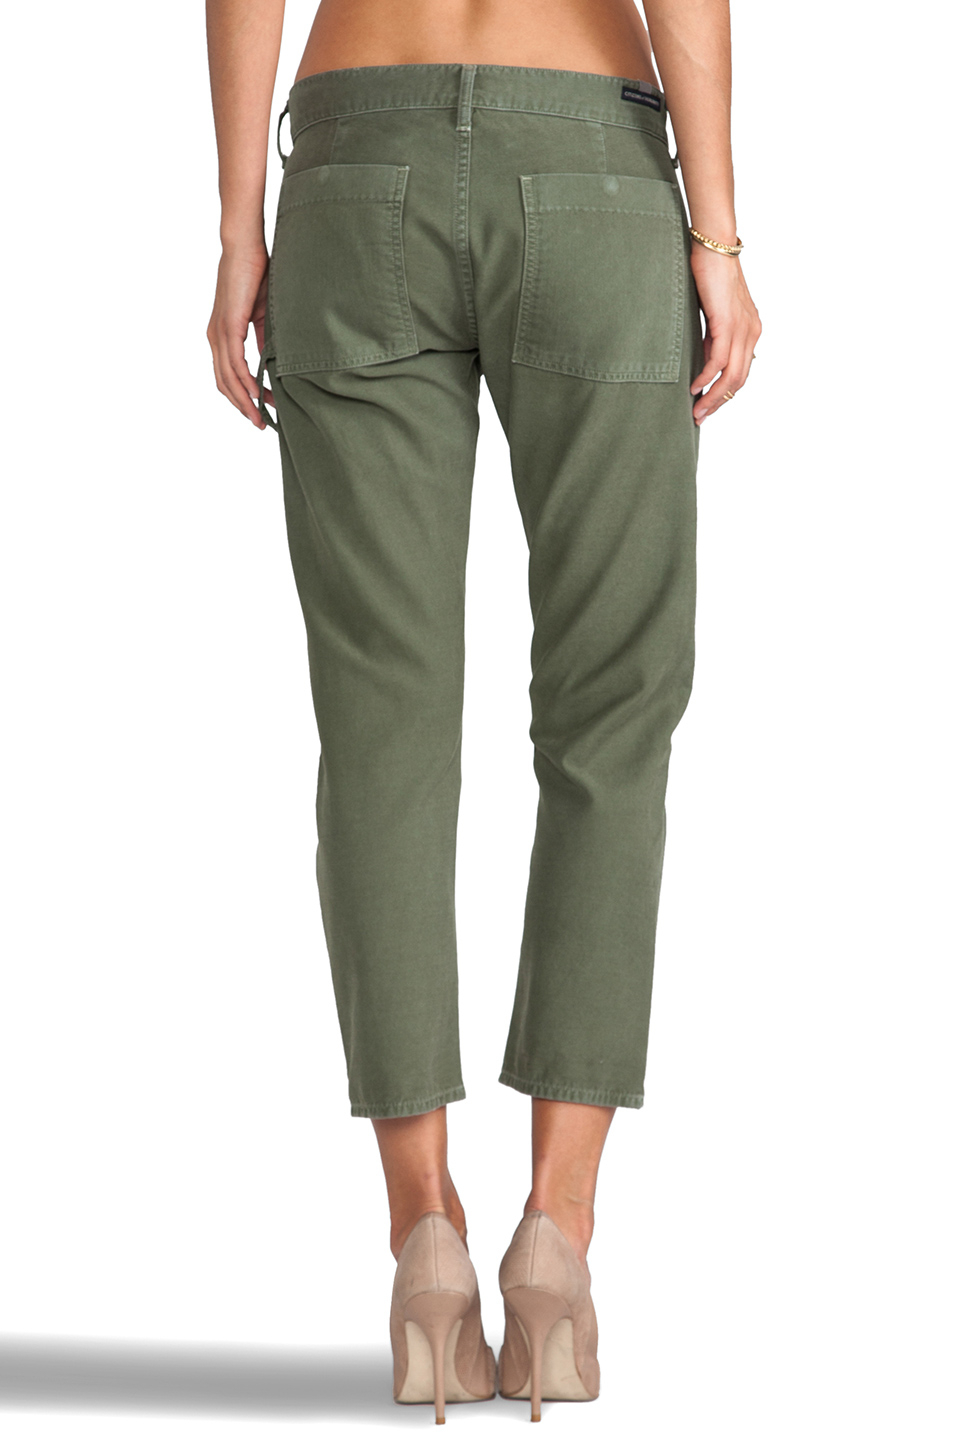 Lyst - Citizens Of Humanity Leah Pant in Green